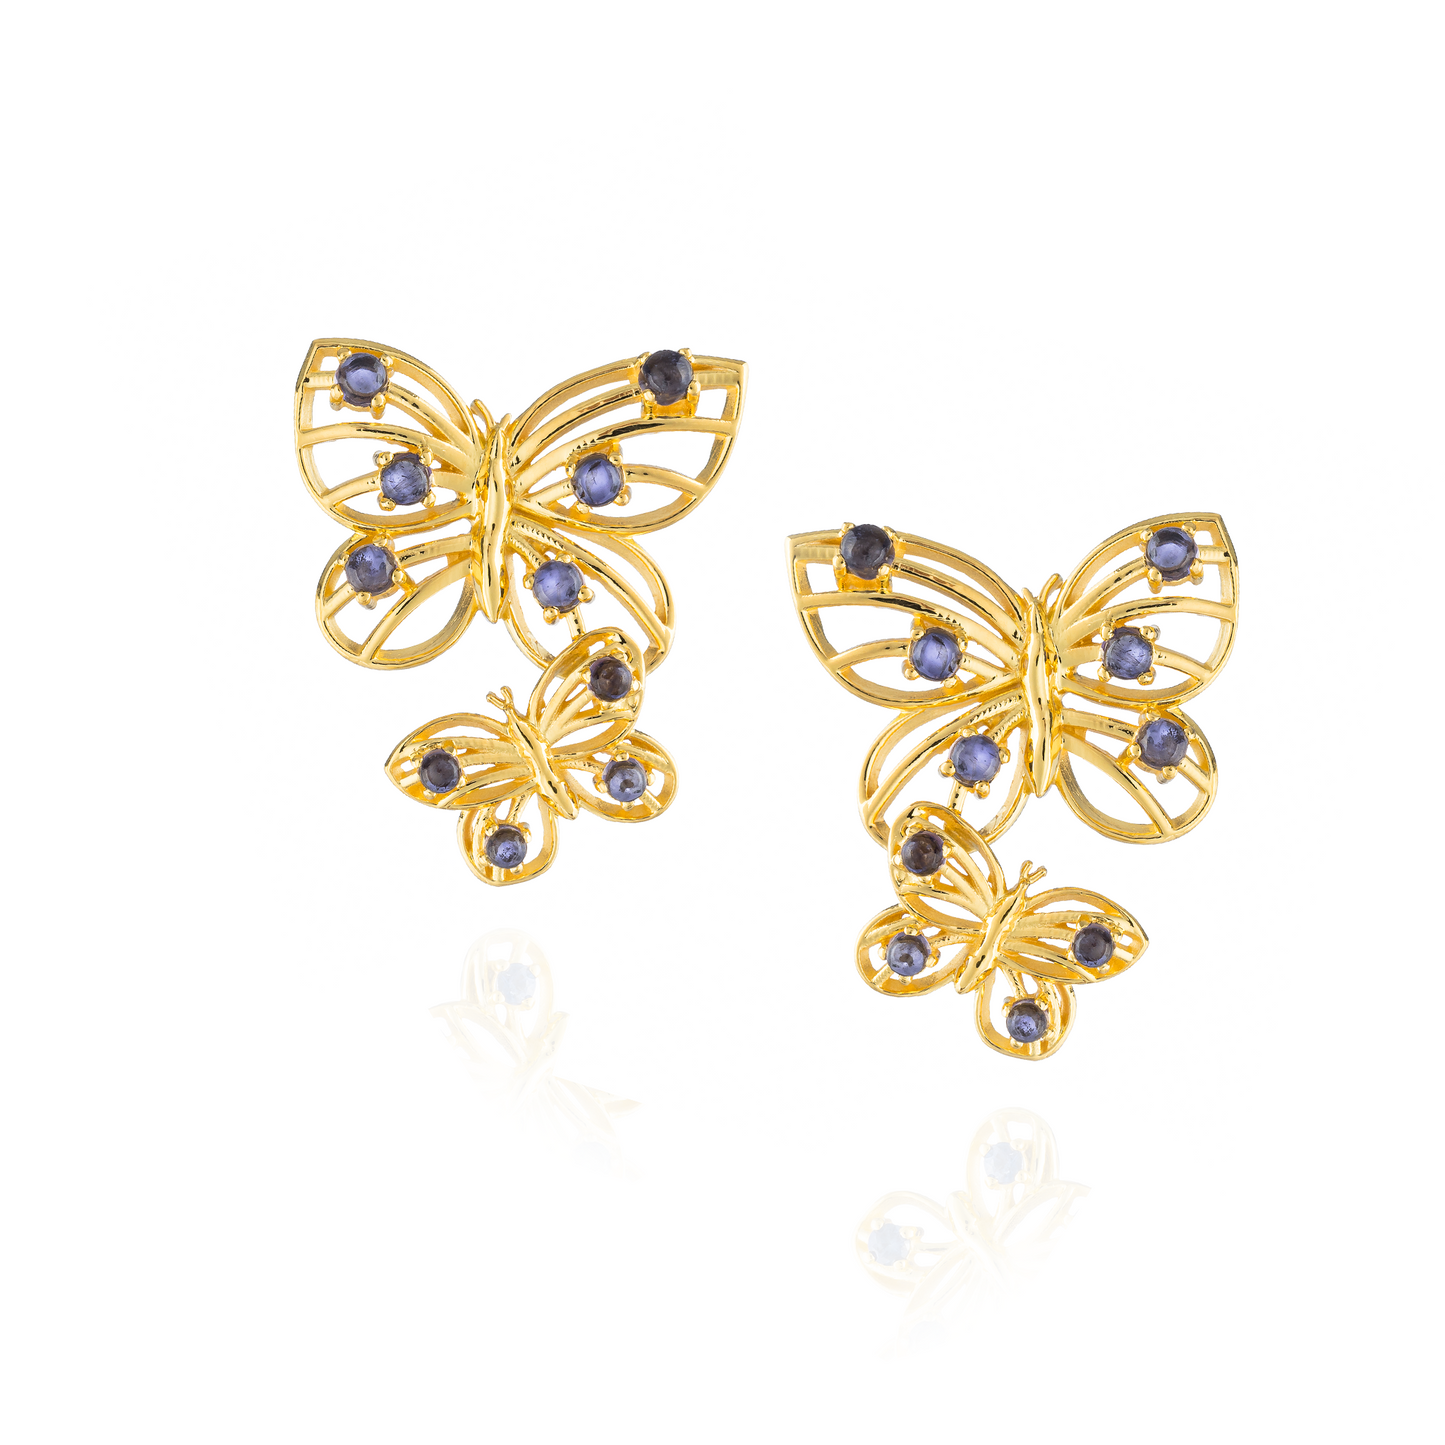 925 Silver Earrings   plated in 18k Yellow Gold with Iolite Cabouchon